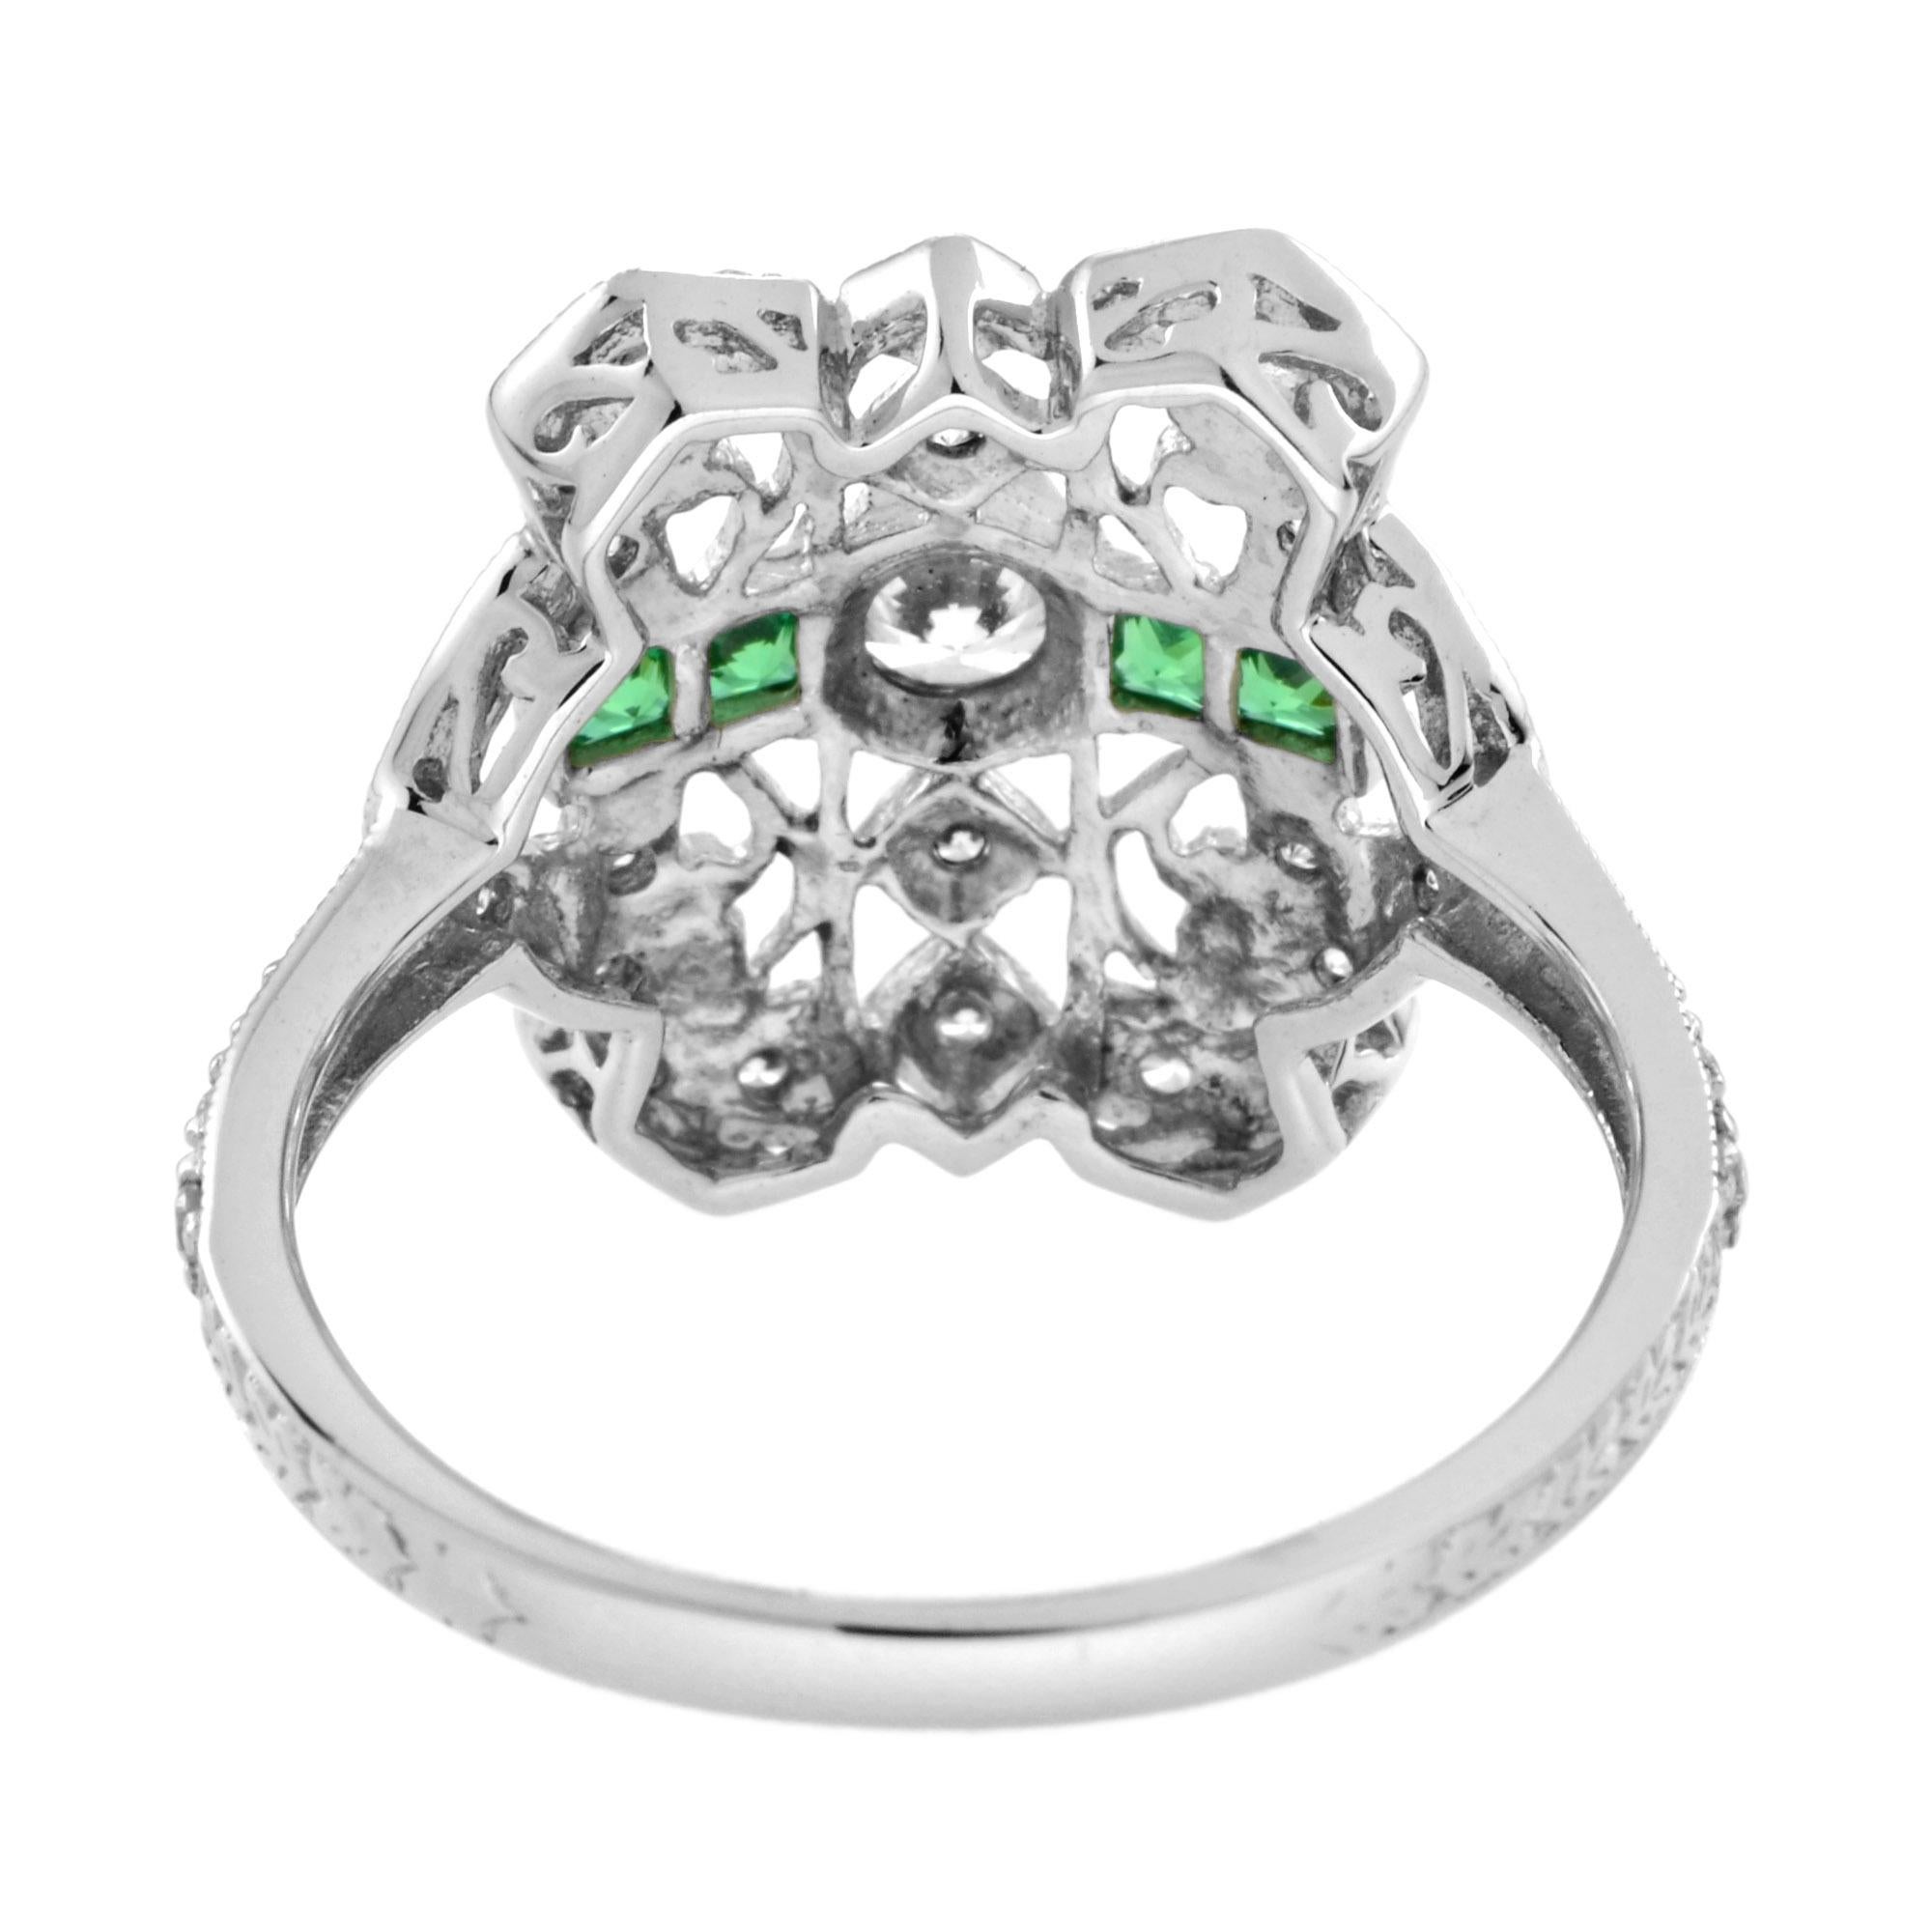 For Sale:  Diamond and Emerald Art Deco Style Filigree Ring in 14K White Gold 4